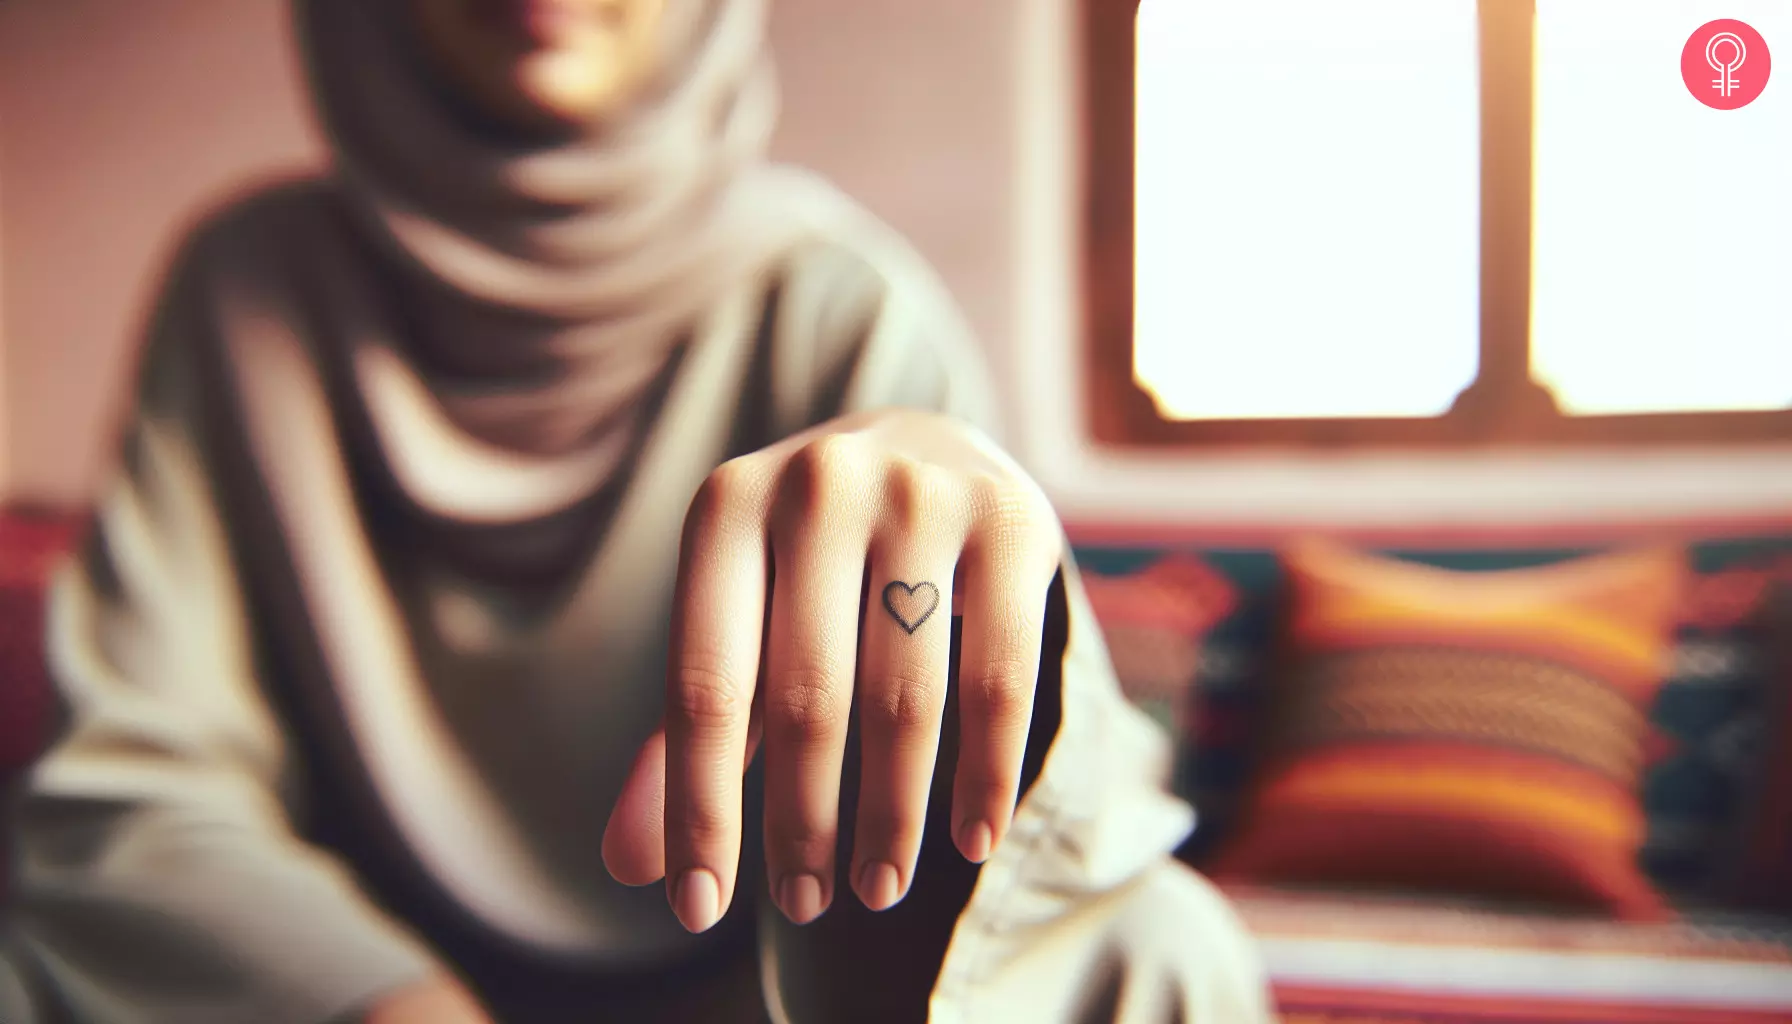 A small heart inked on the ring finger